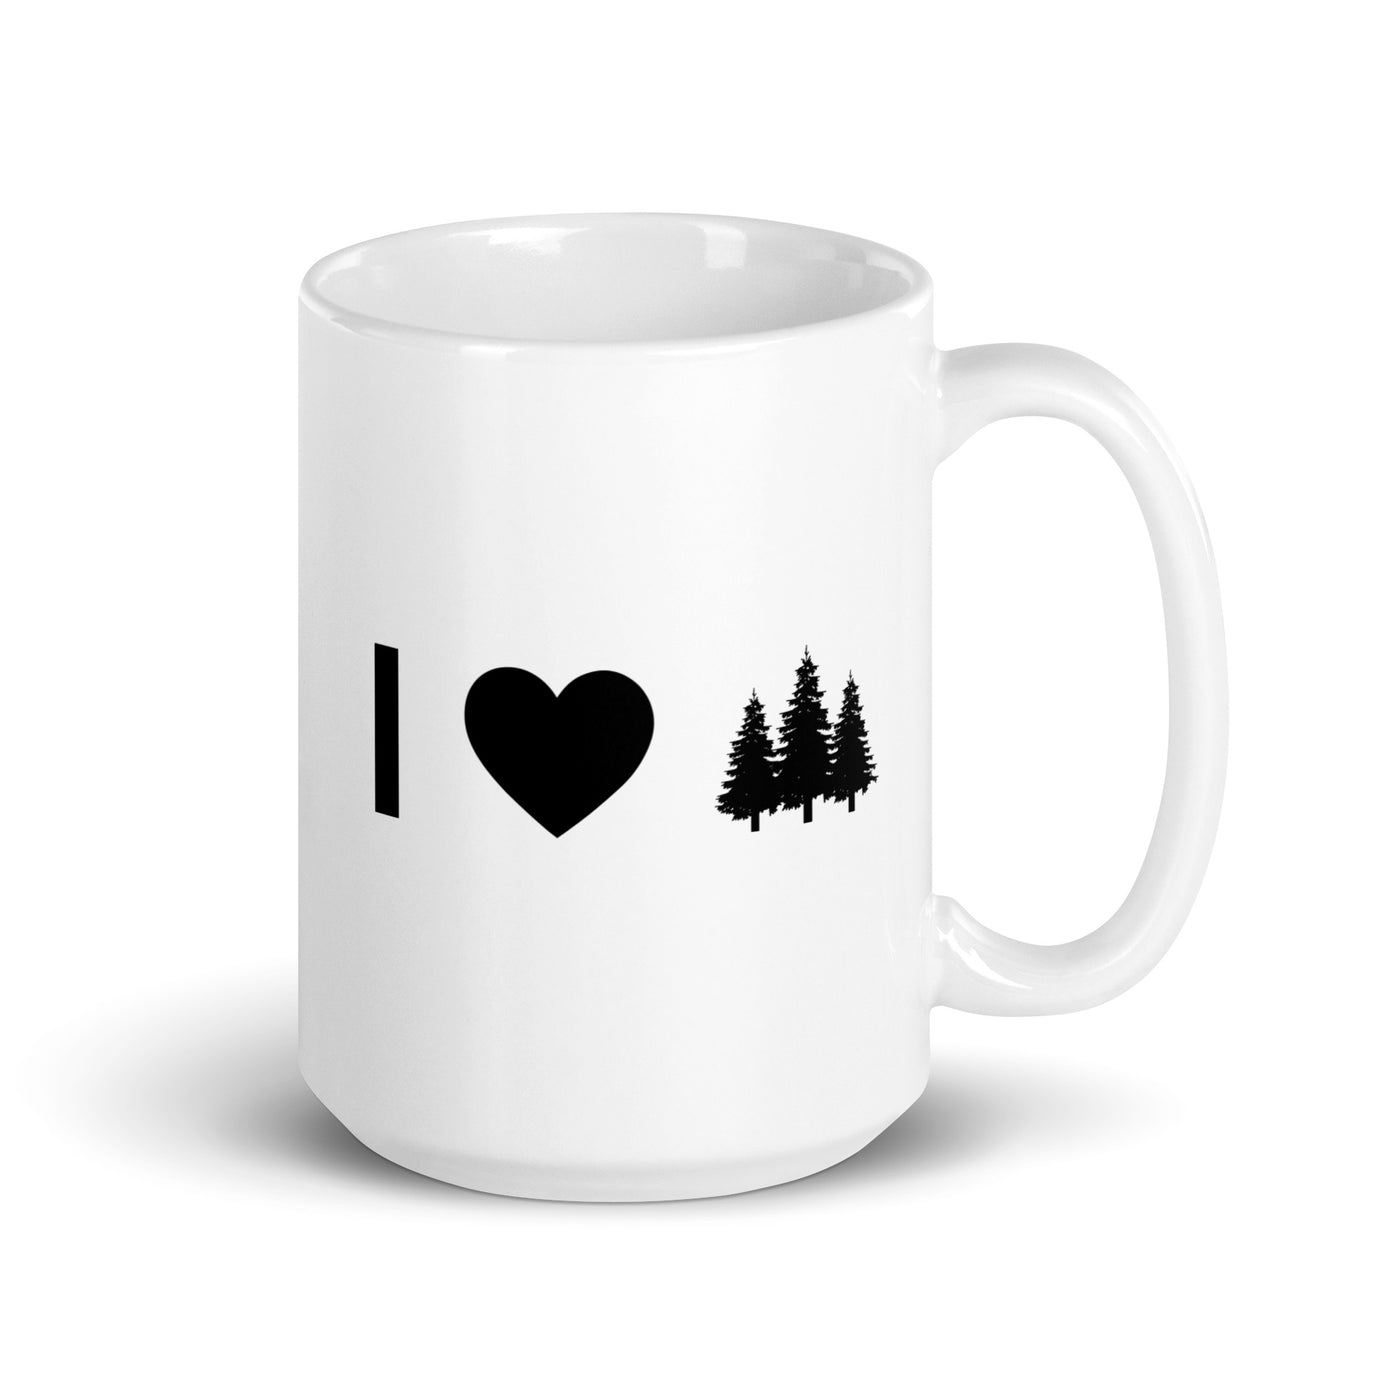 I Heart And Trees - Tasse camping 15oz